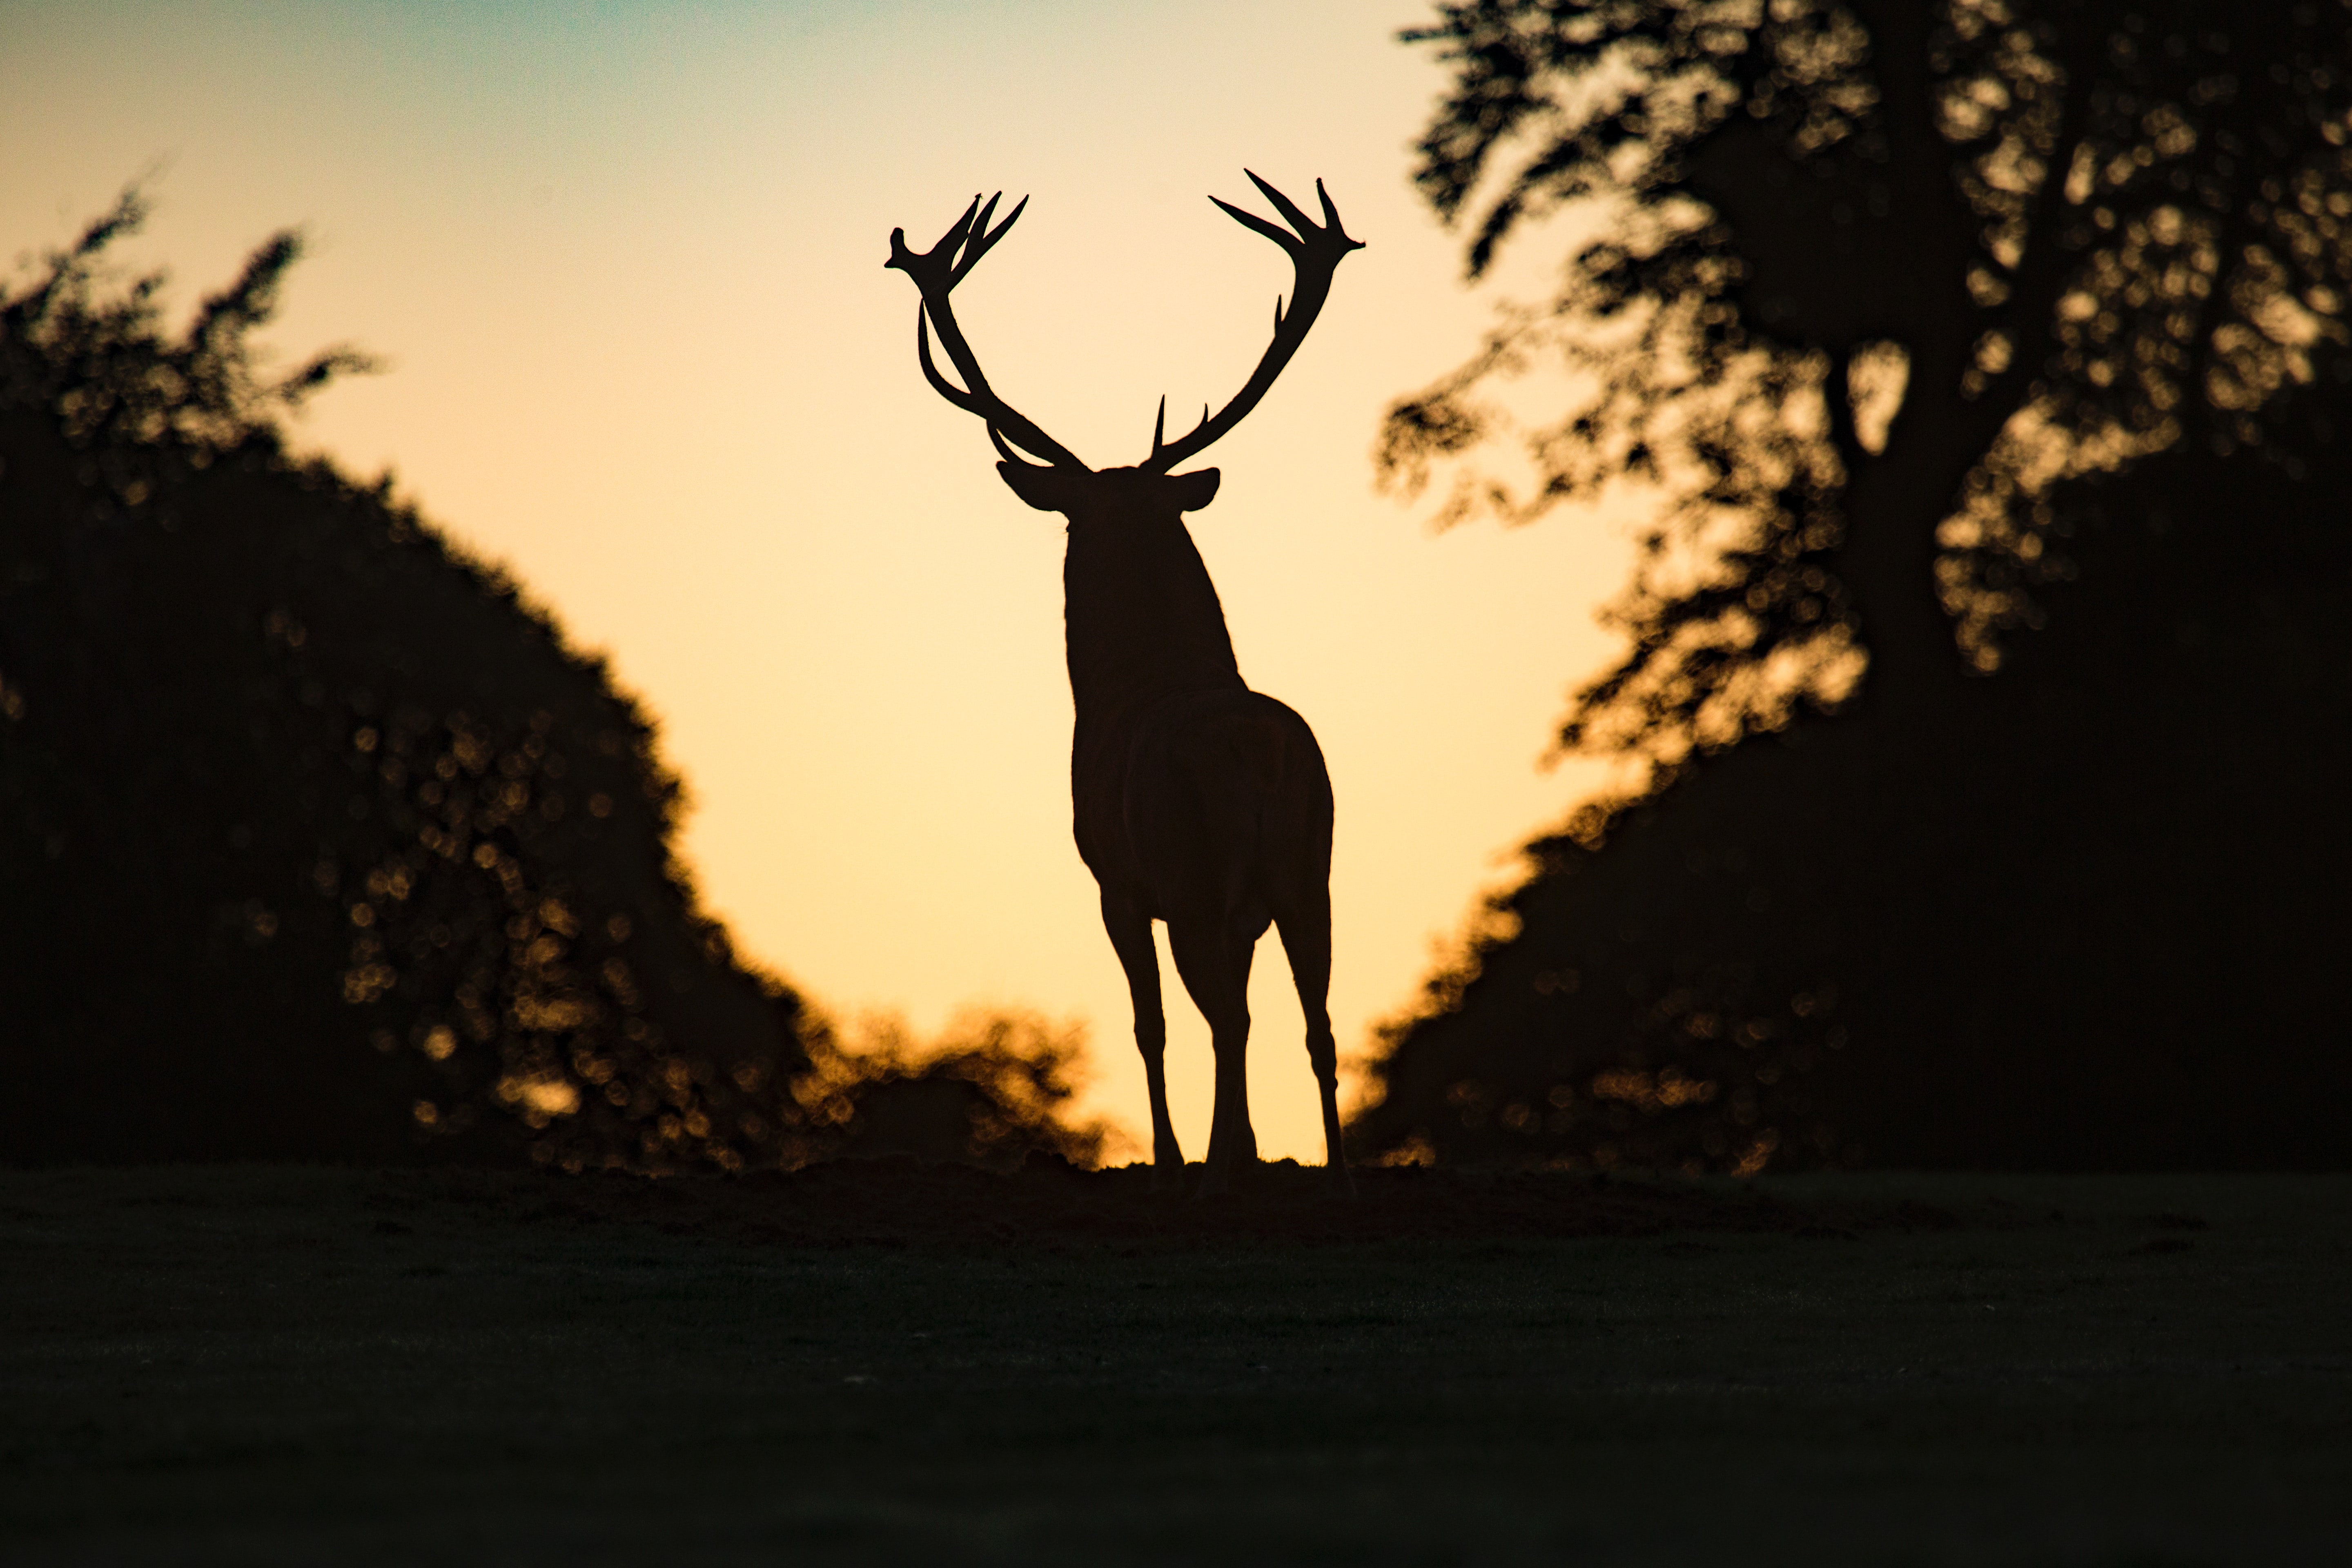 The silhouette of a deer